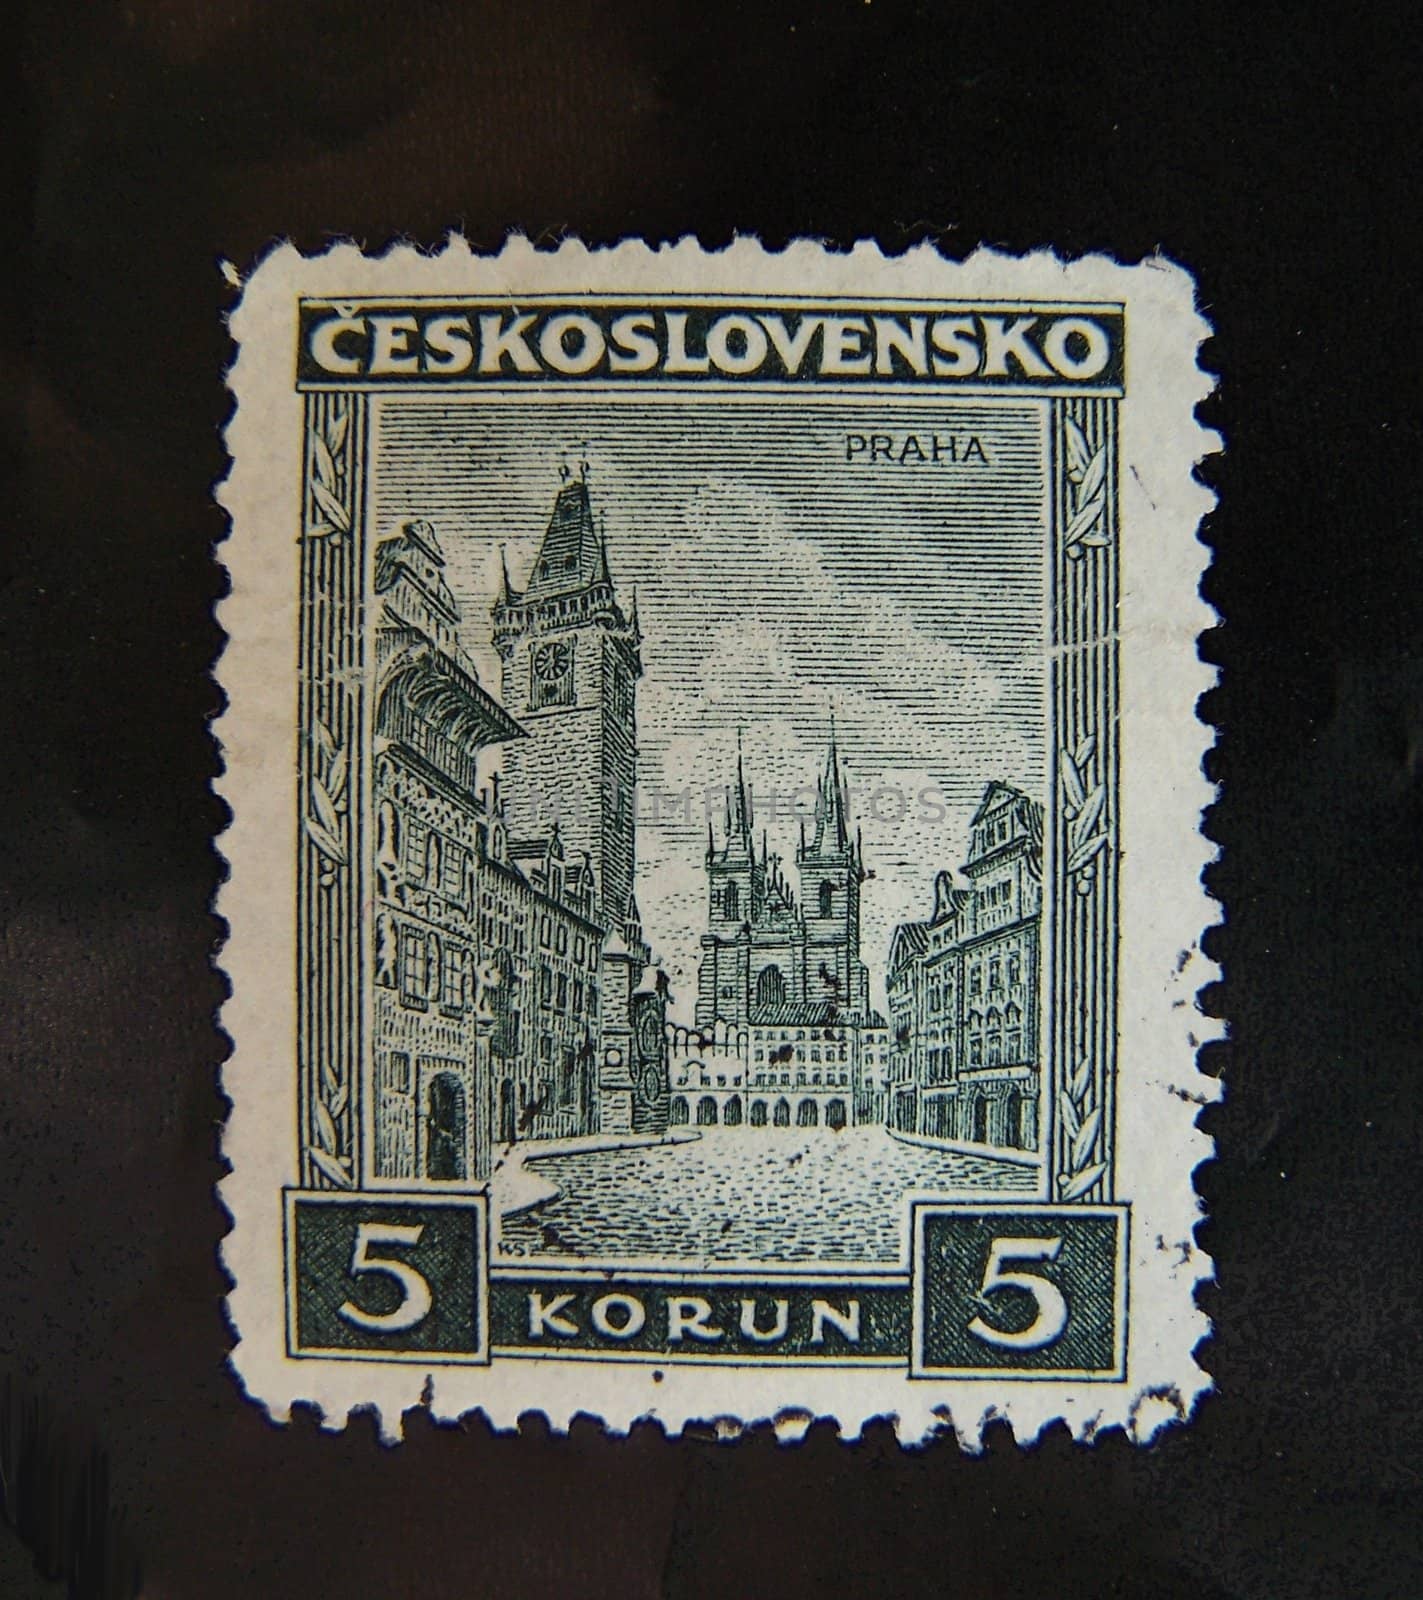 Czechoslovakian stamp with Prague's Old town square depicted on it